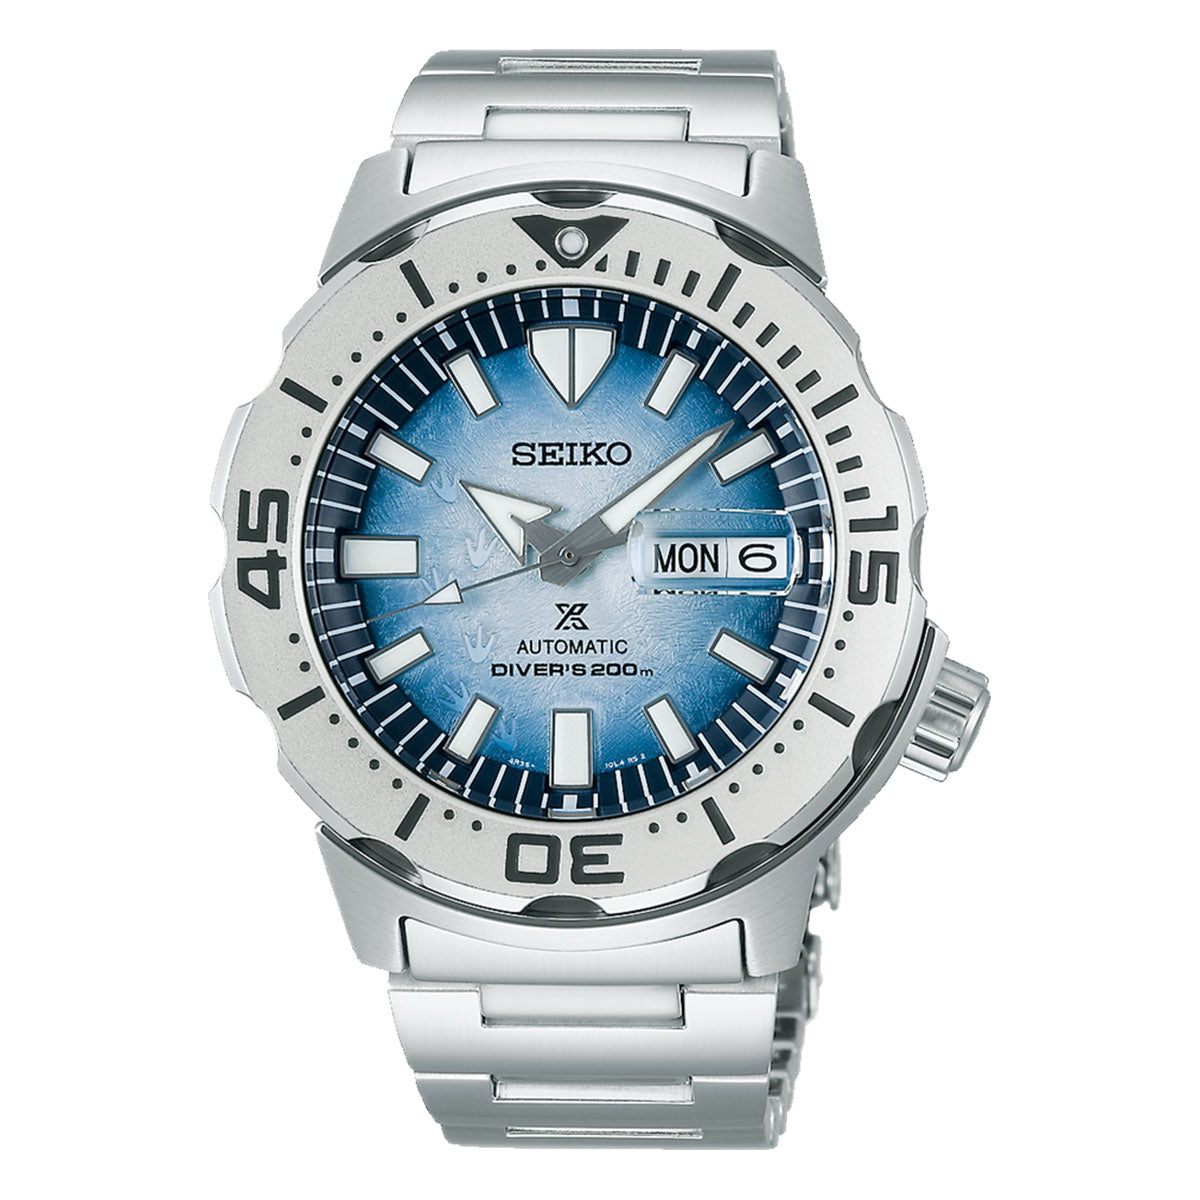 Seiko Prospex Sea Save The Ocean Special Edition Automatic With Manual Winding 42.4mm Watch